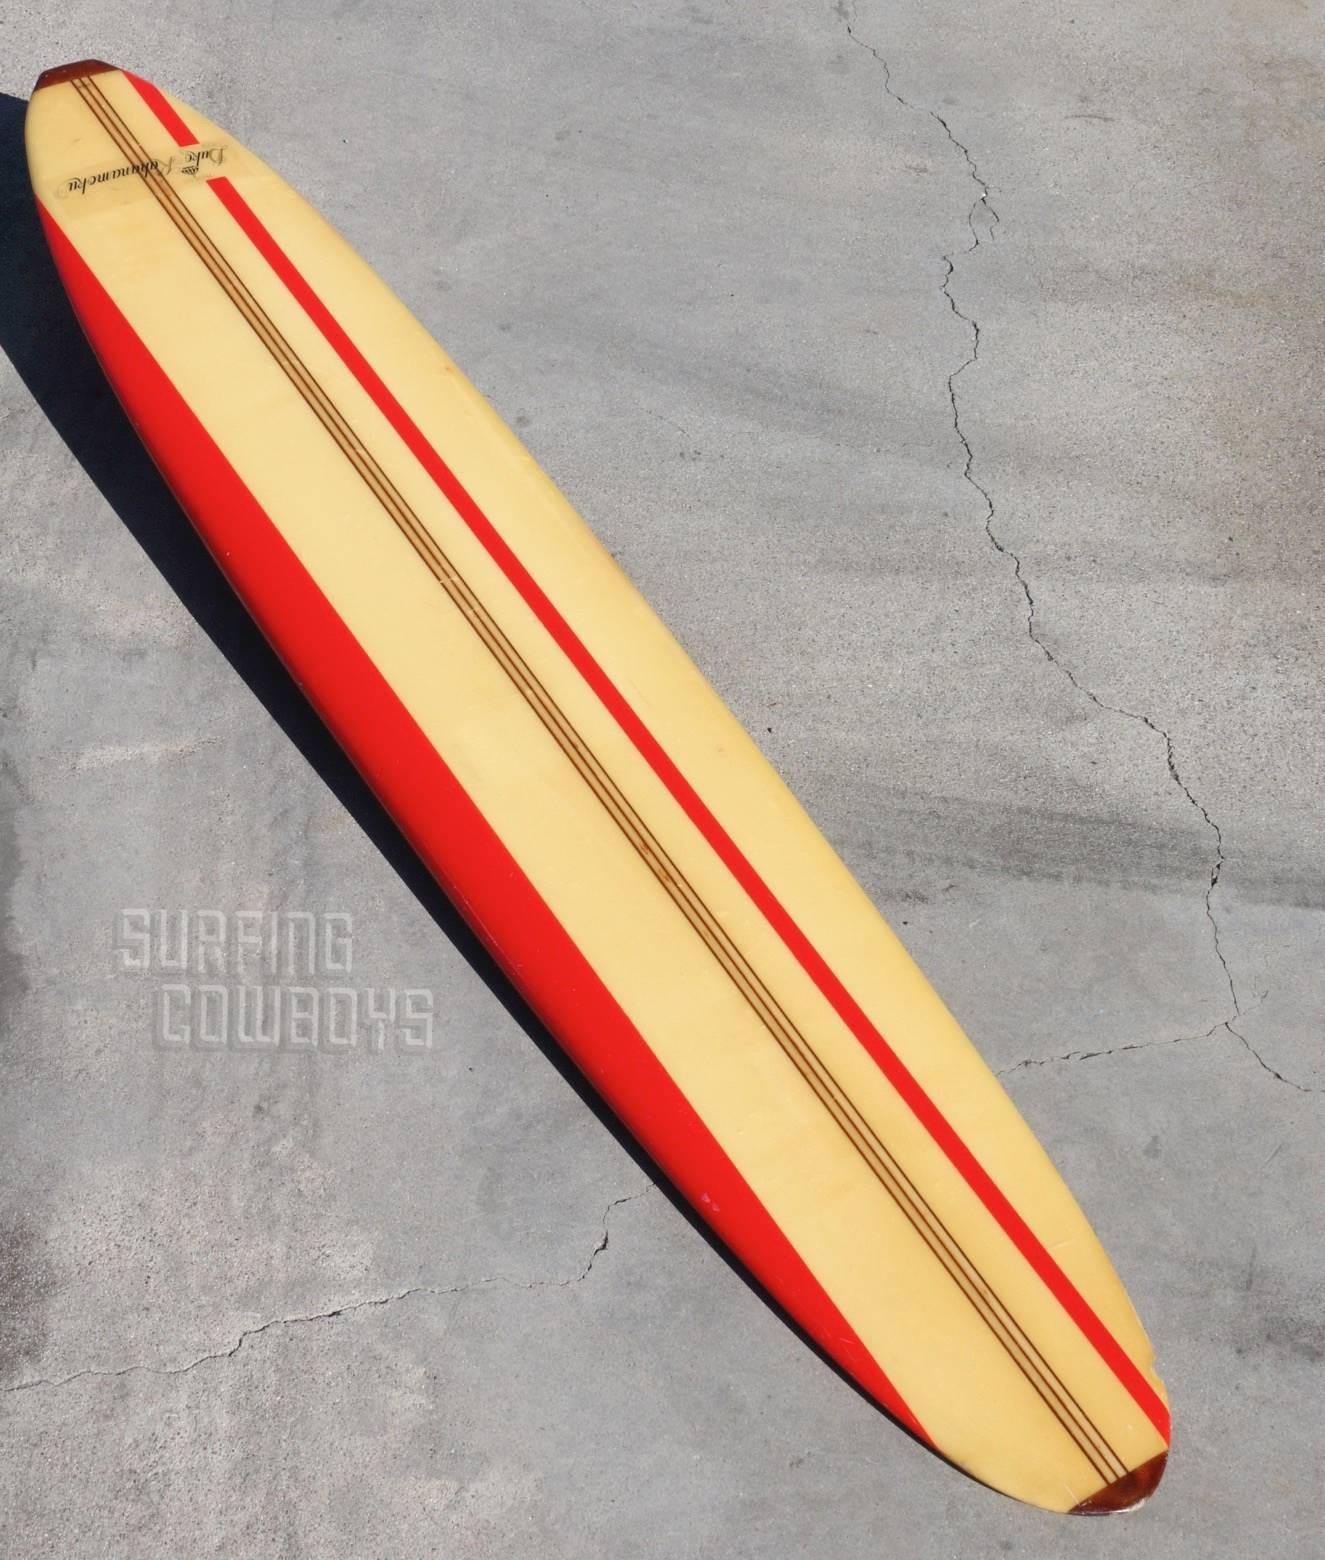 This classic longboard is a throwback to the Beach Boys era and captures a slice of times gone by. Perfect to prop in a corner, hang on a wall or sit atop a Woody Station Wagon headed to the beach. The red stripe and rail, three redwood stringers,